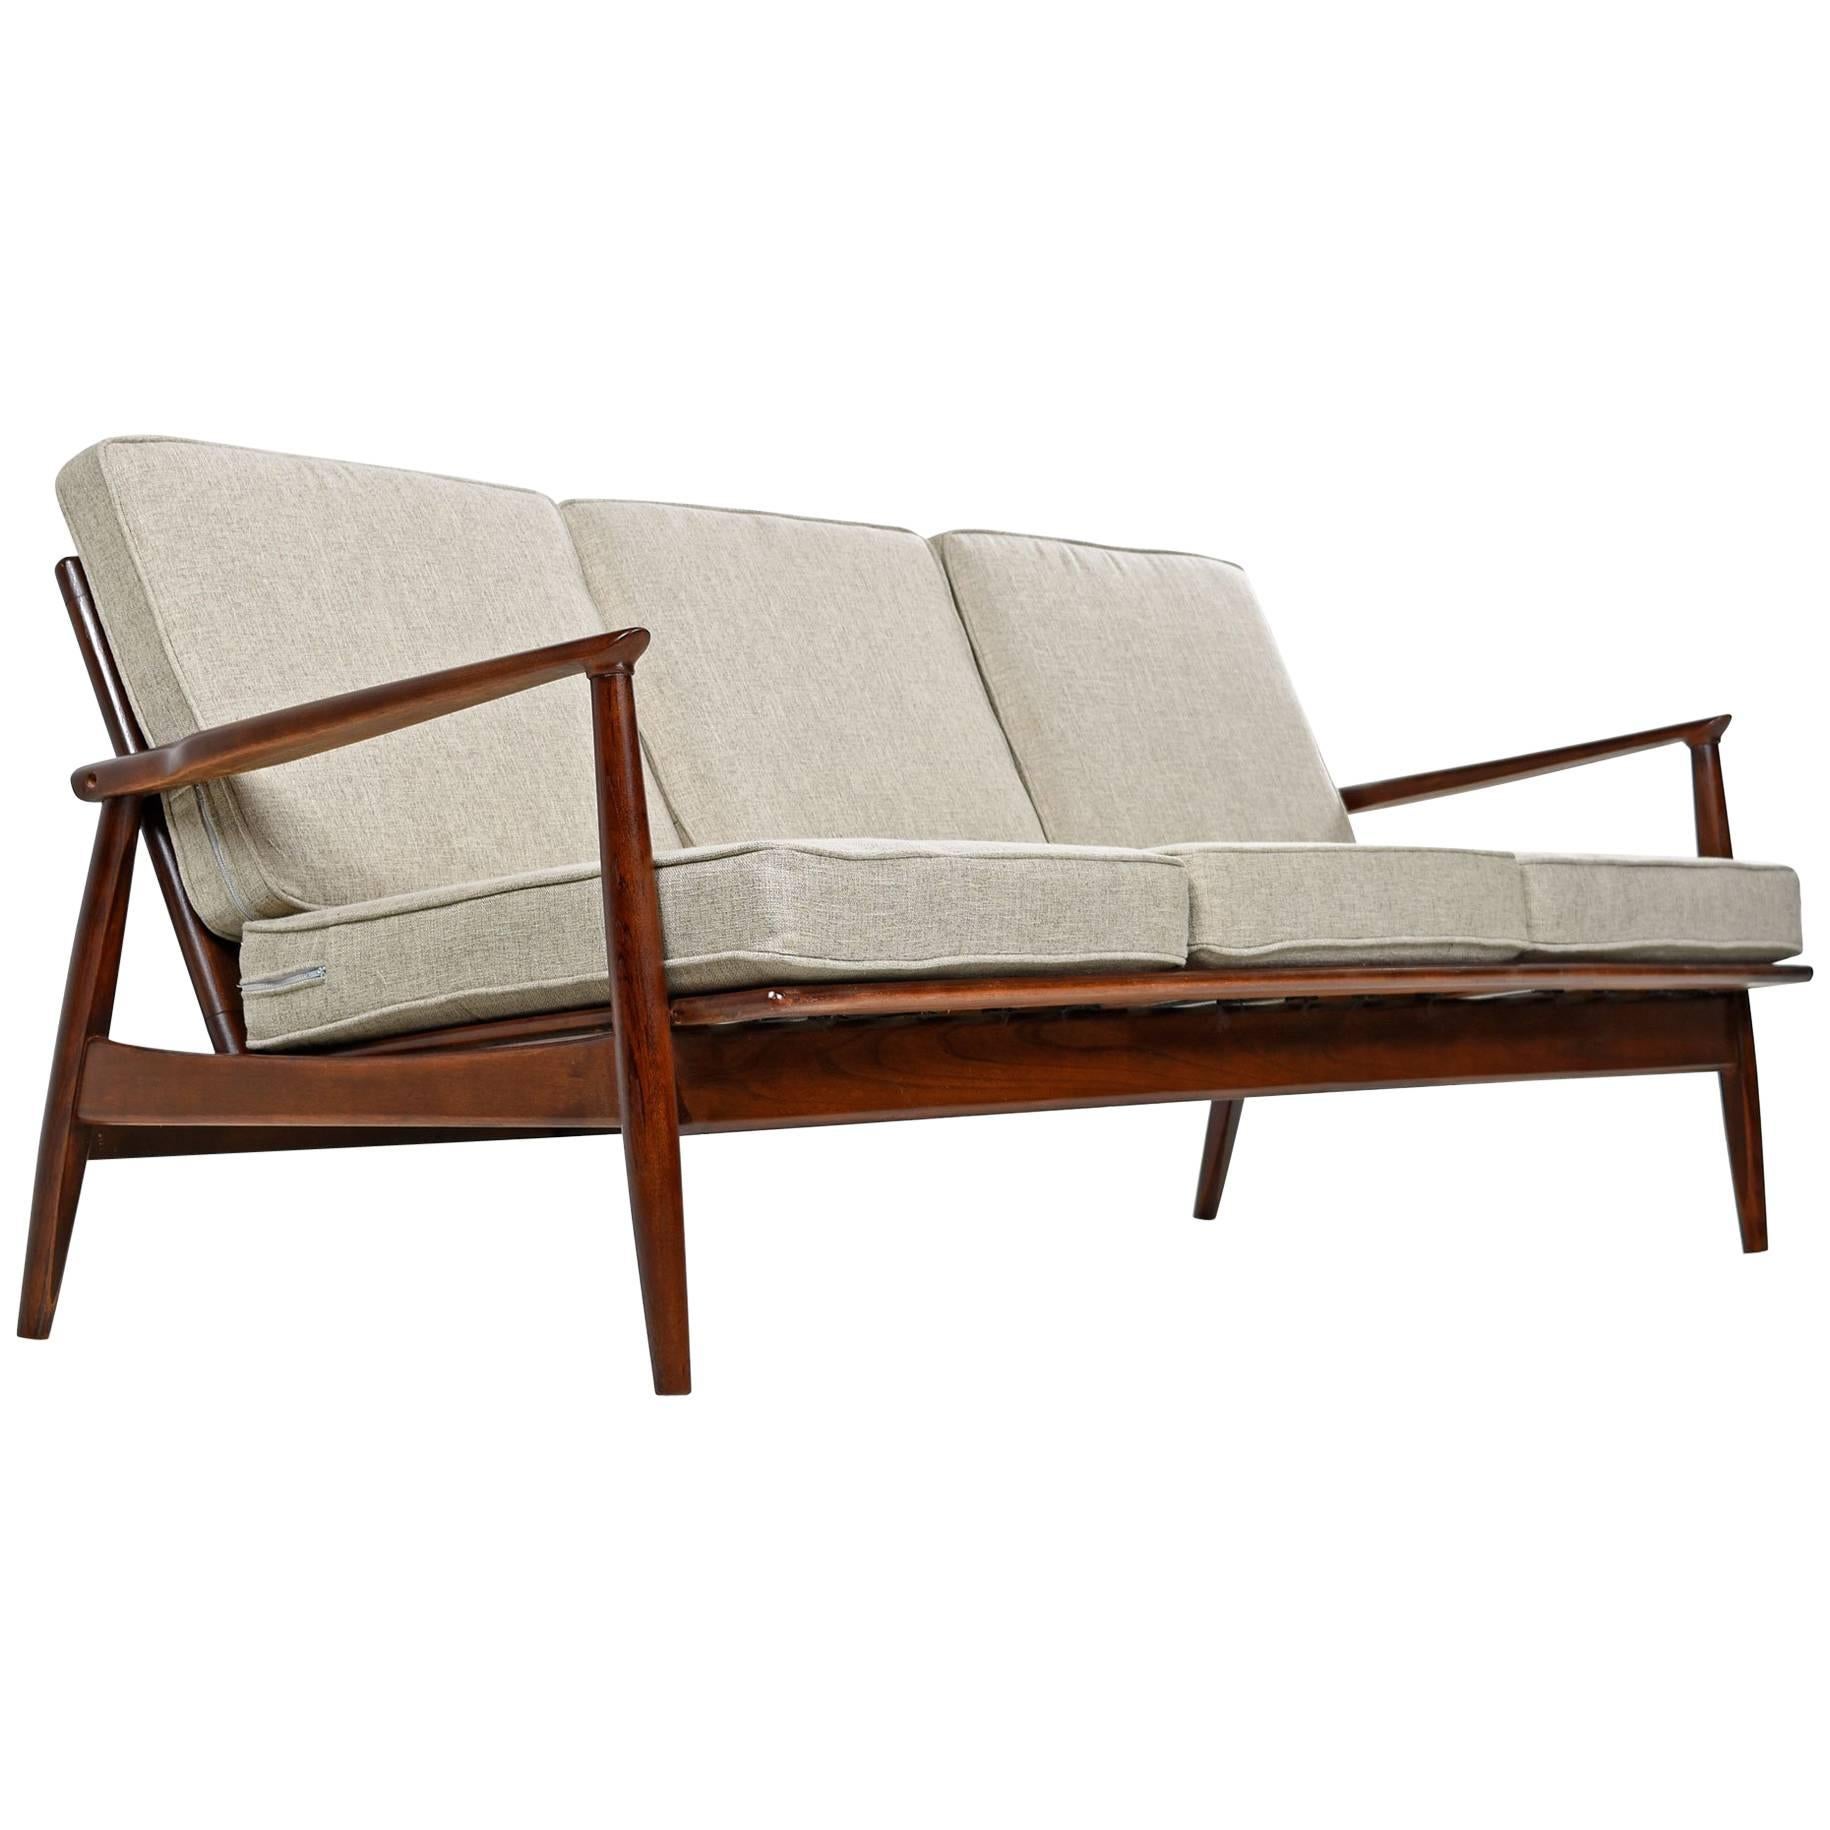 Mid-Century Modern Grete Jalk Style Three-Seat Wood Frame Sofa Couch